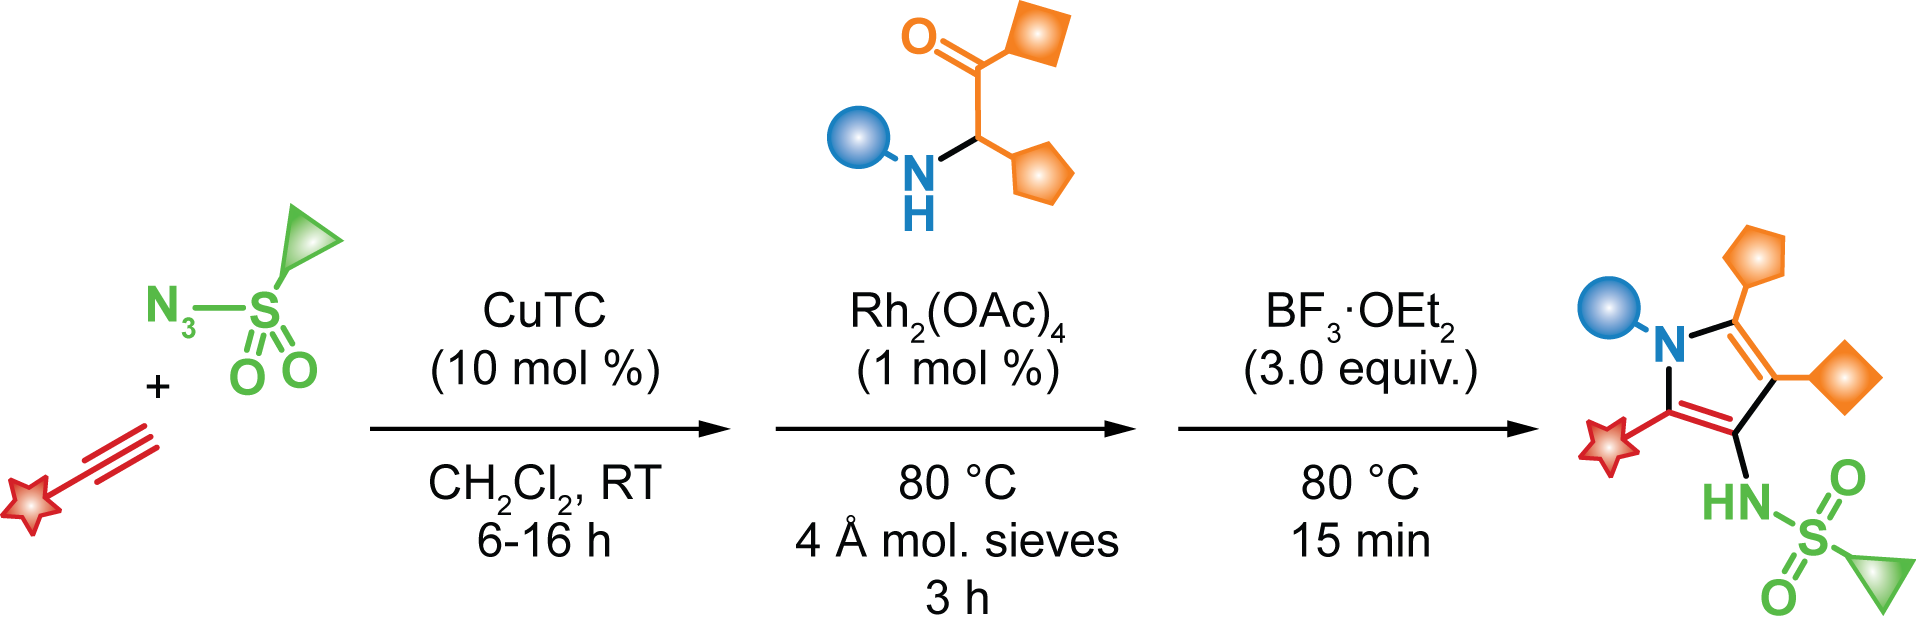 Abstract image for Modular Synthesis of Highly Substituted 3- Azapyrroles by Rh(II)-Catalyzed N–H Bond Insertion and Cyclodehydration